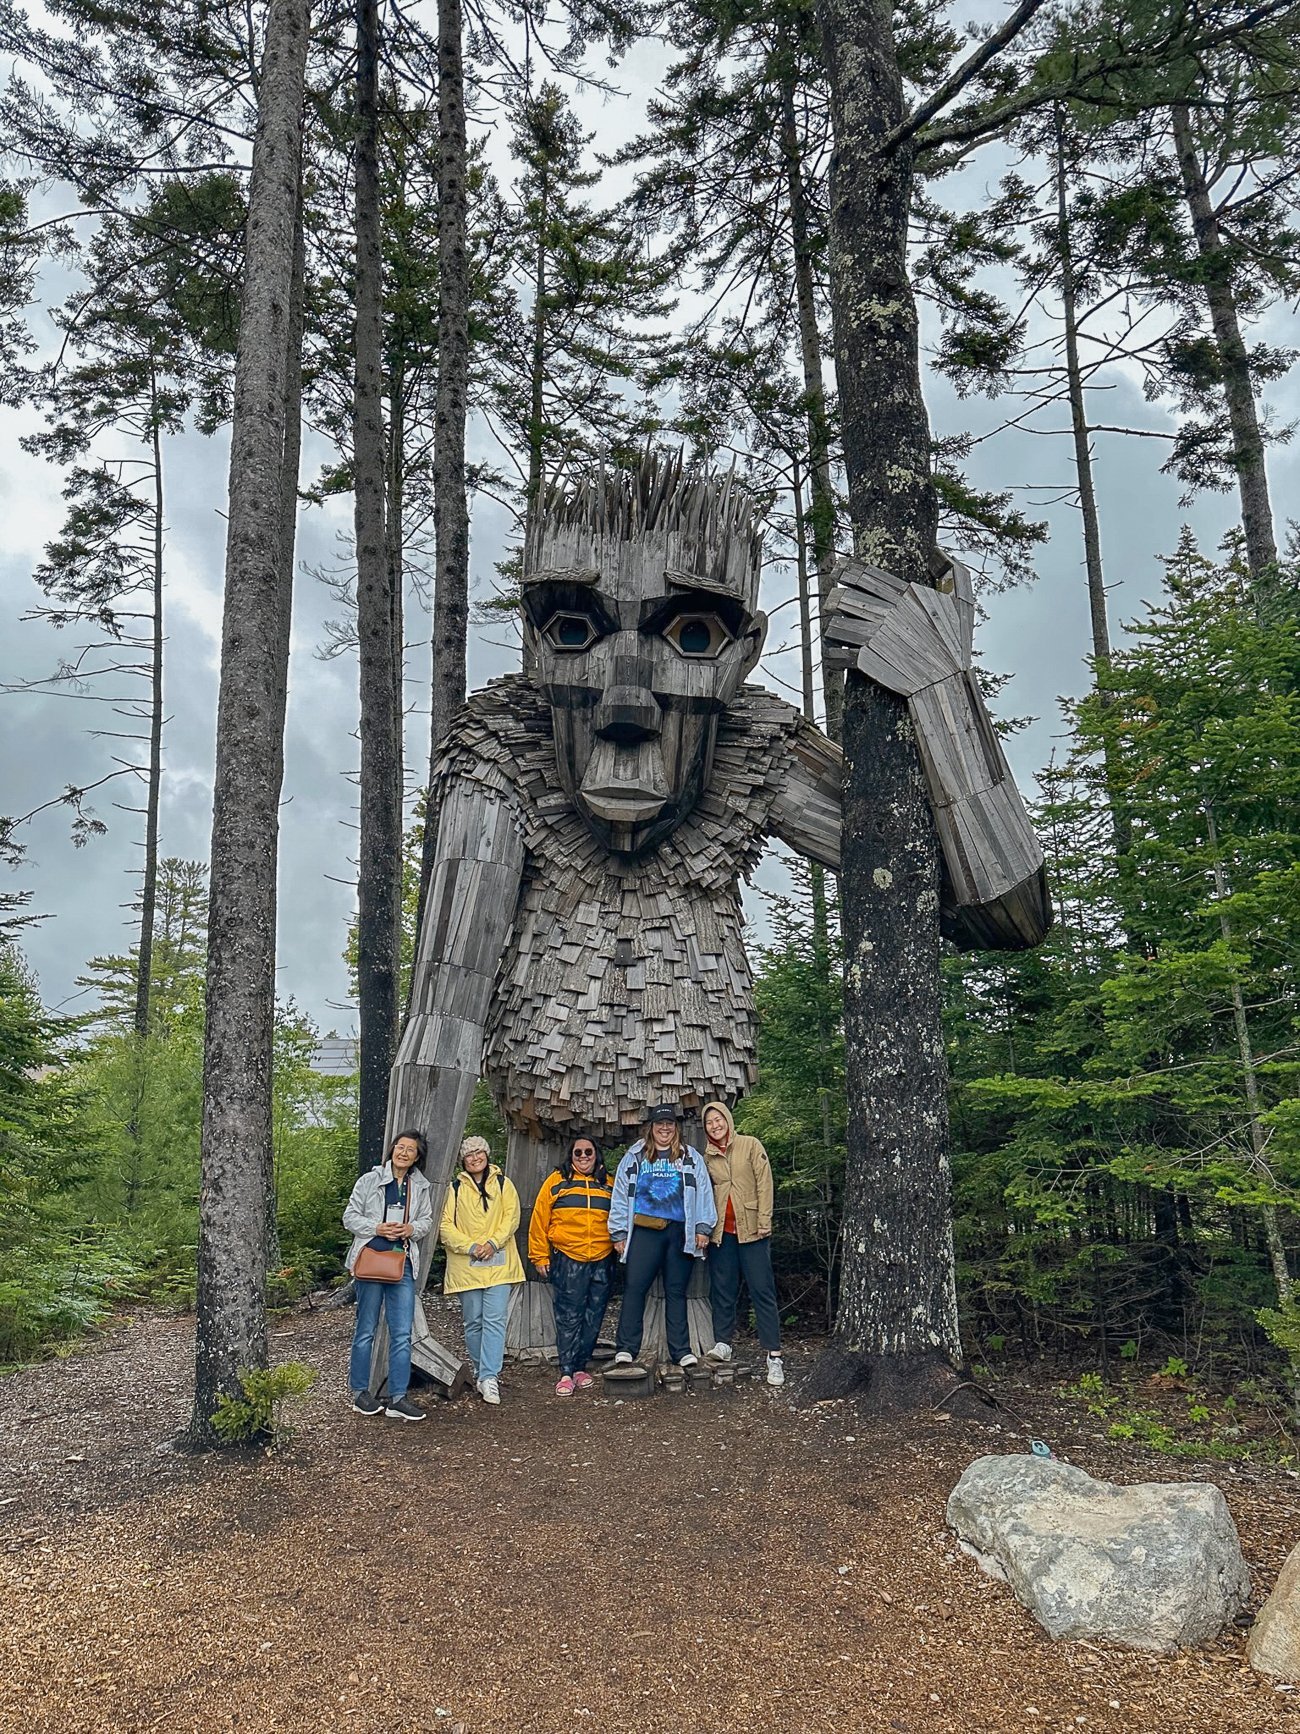 Group photo under a troll made of wood at the Coastal Maine Botanical Garden